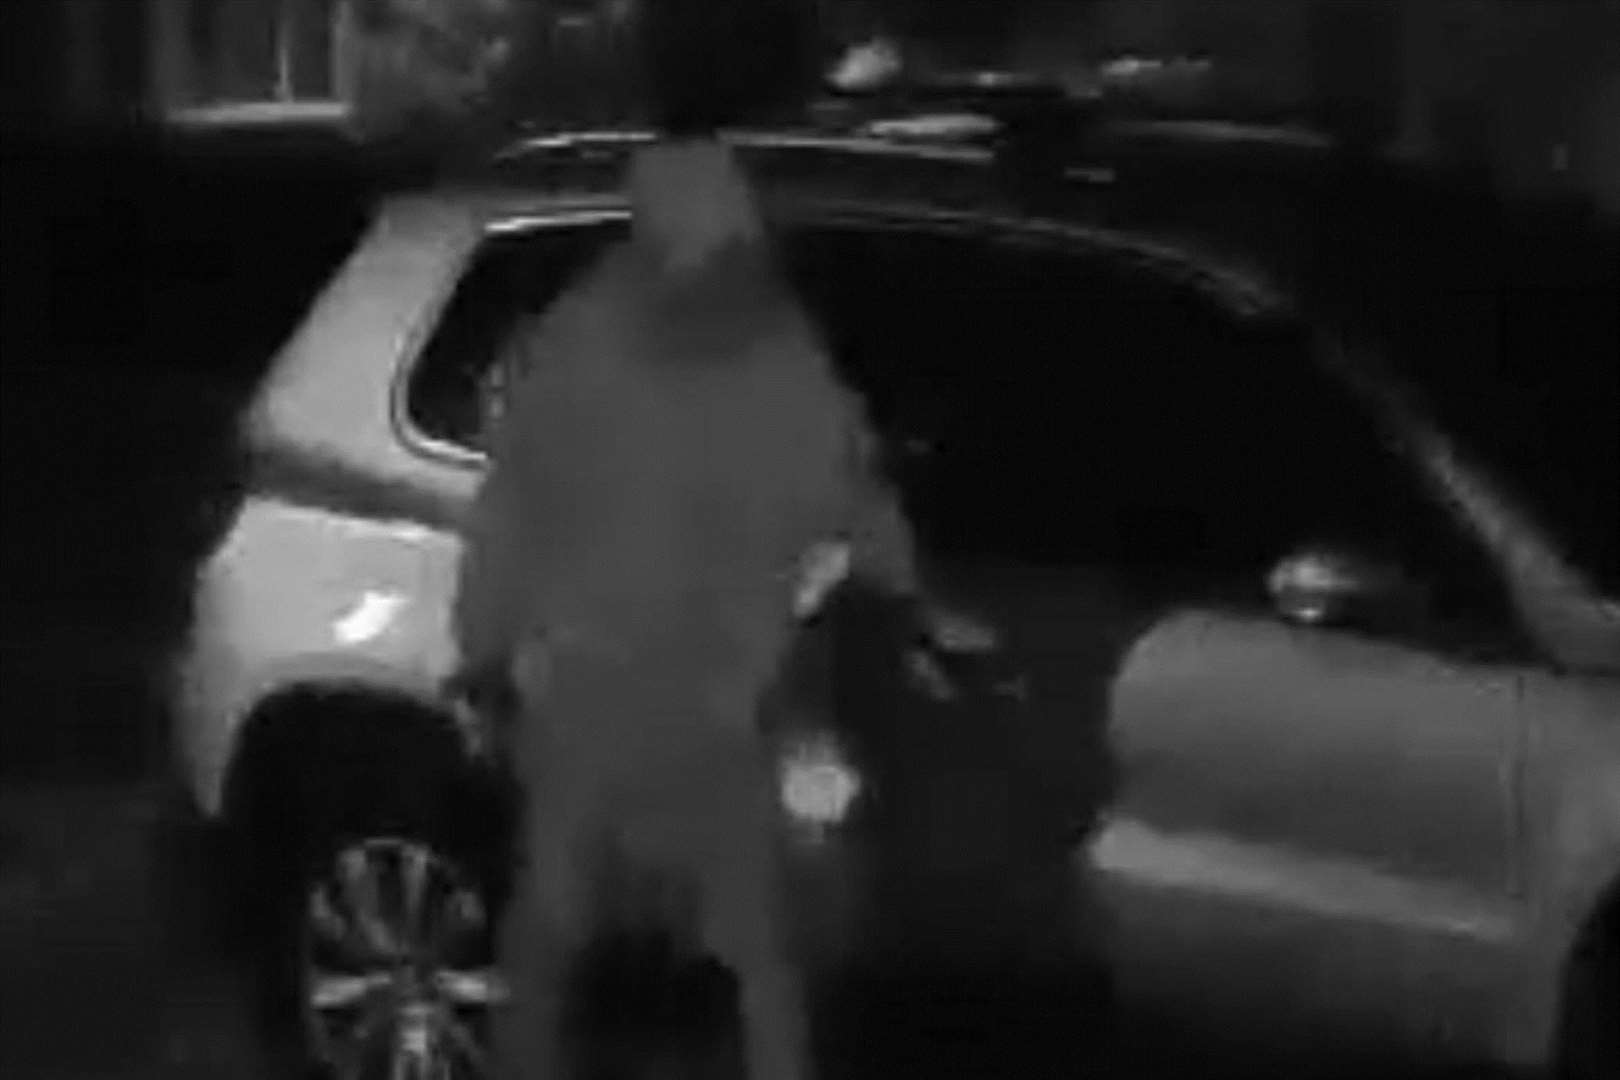 A resident caught a person in a hoodie trying to get into their neighbour's car at about 1am on Essella Road